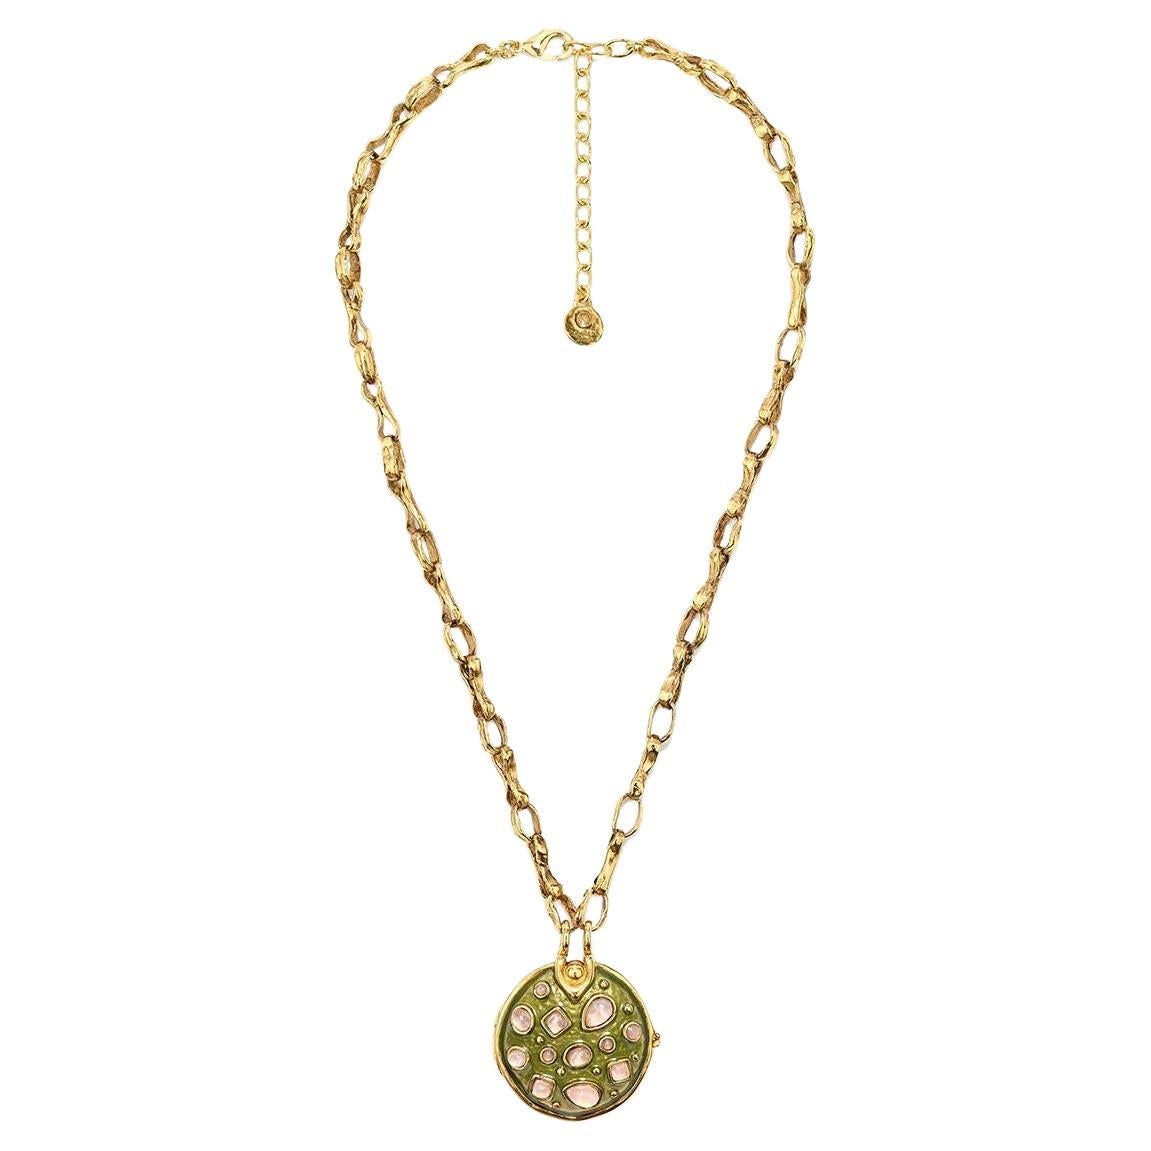 New at the House of Goossens. Necklace with medallion and secret box, mounted on a sautoir chain. Yellow gold finish. The Boucle Cocktail Collection reveals a jewel in relief punctuated with rock crystal beads on a patinated enamel. Colour Bicolor